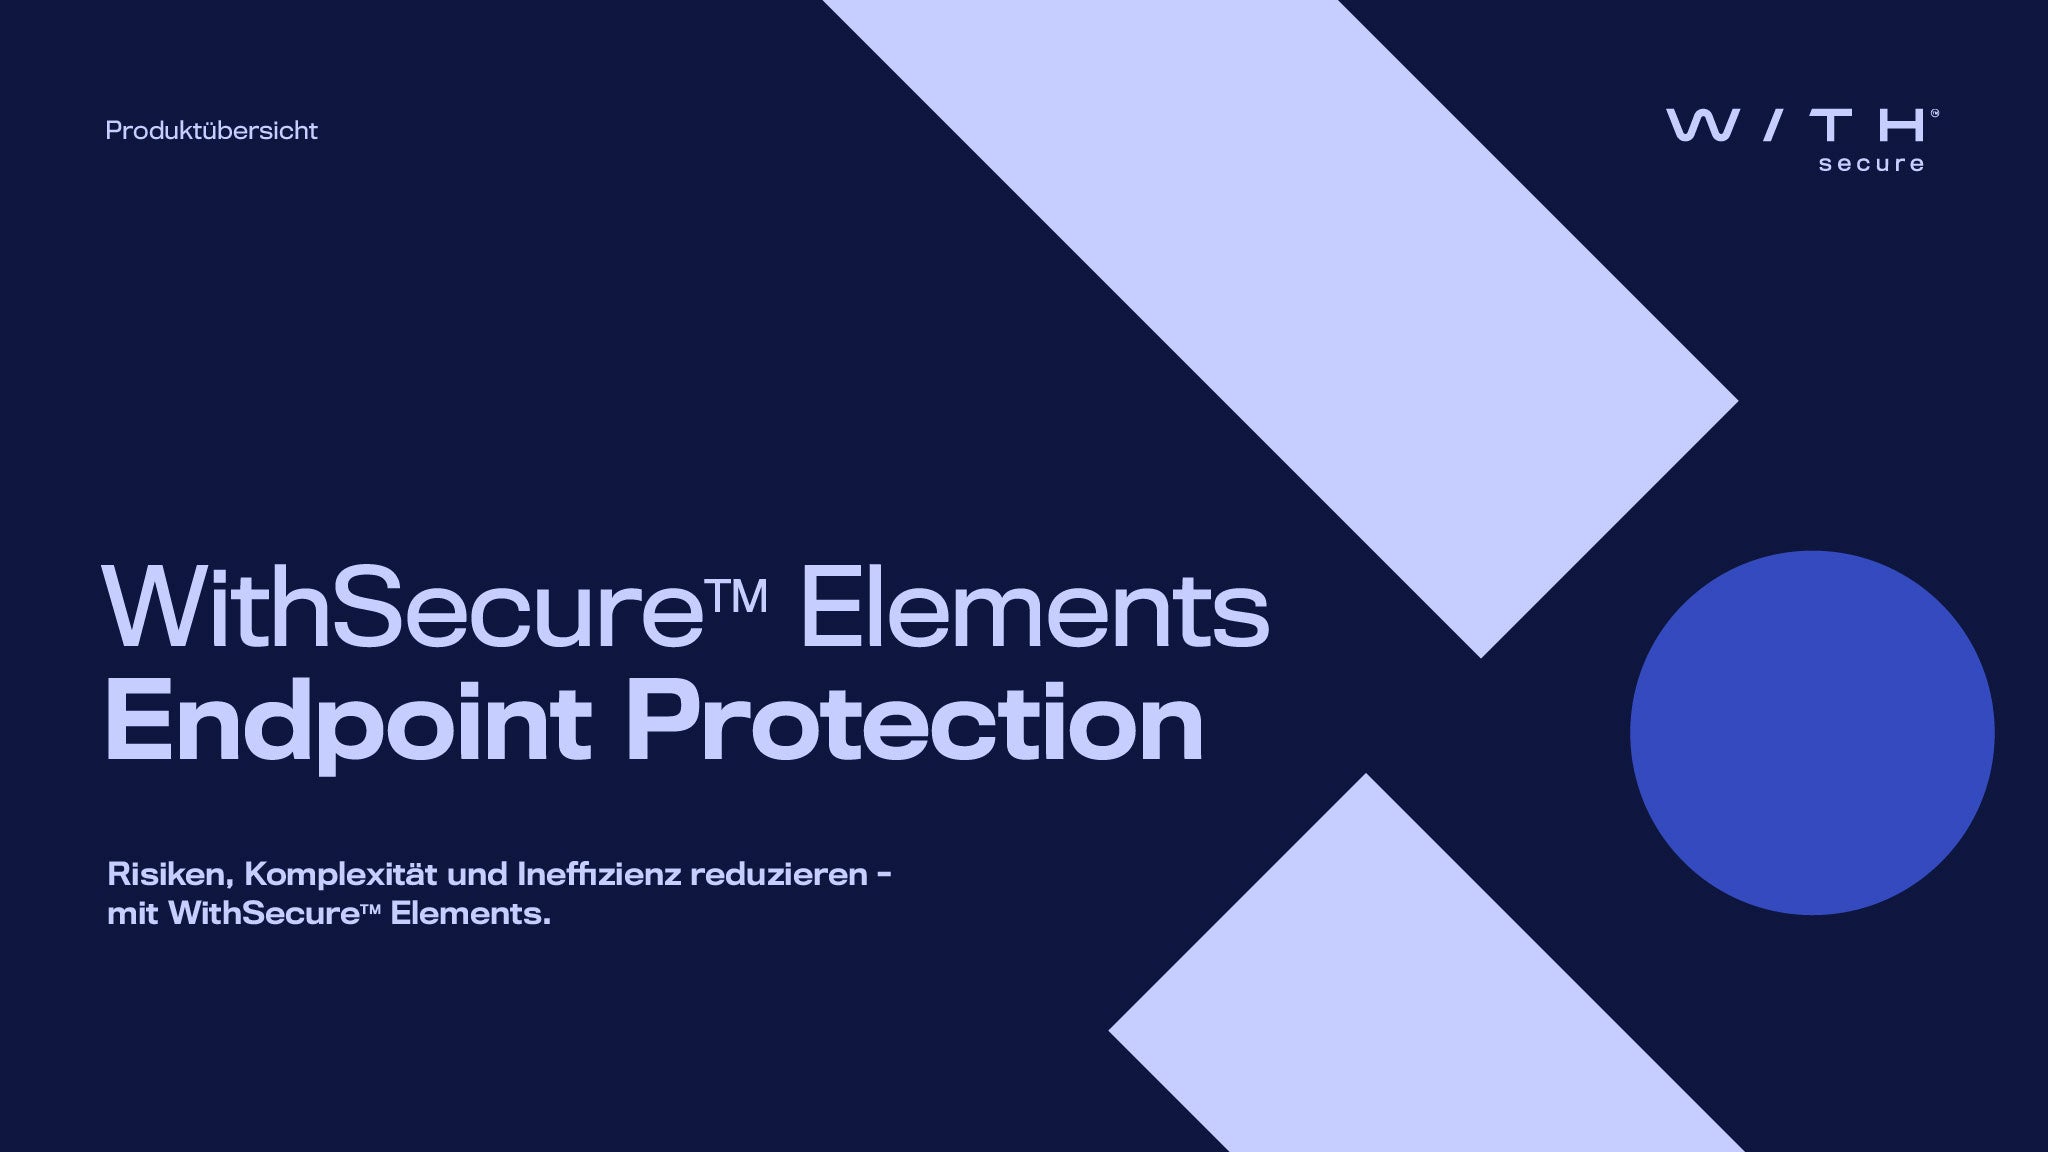 WithSecure-Elements-EPP-Solution-Overview_DE_thumb